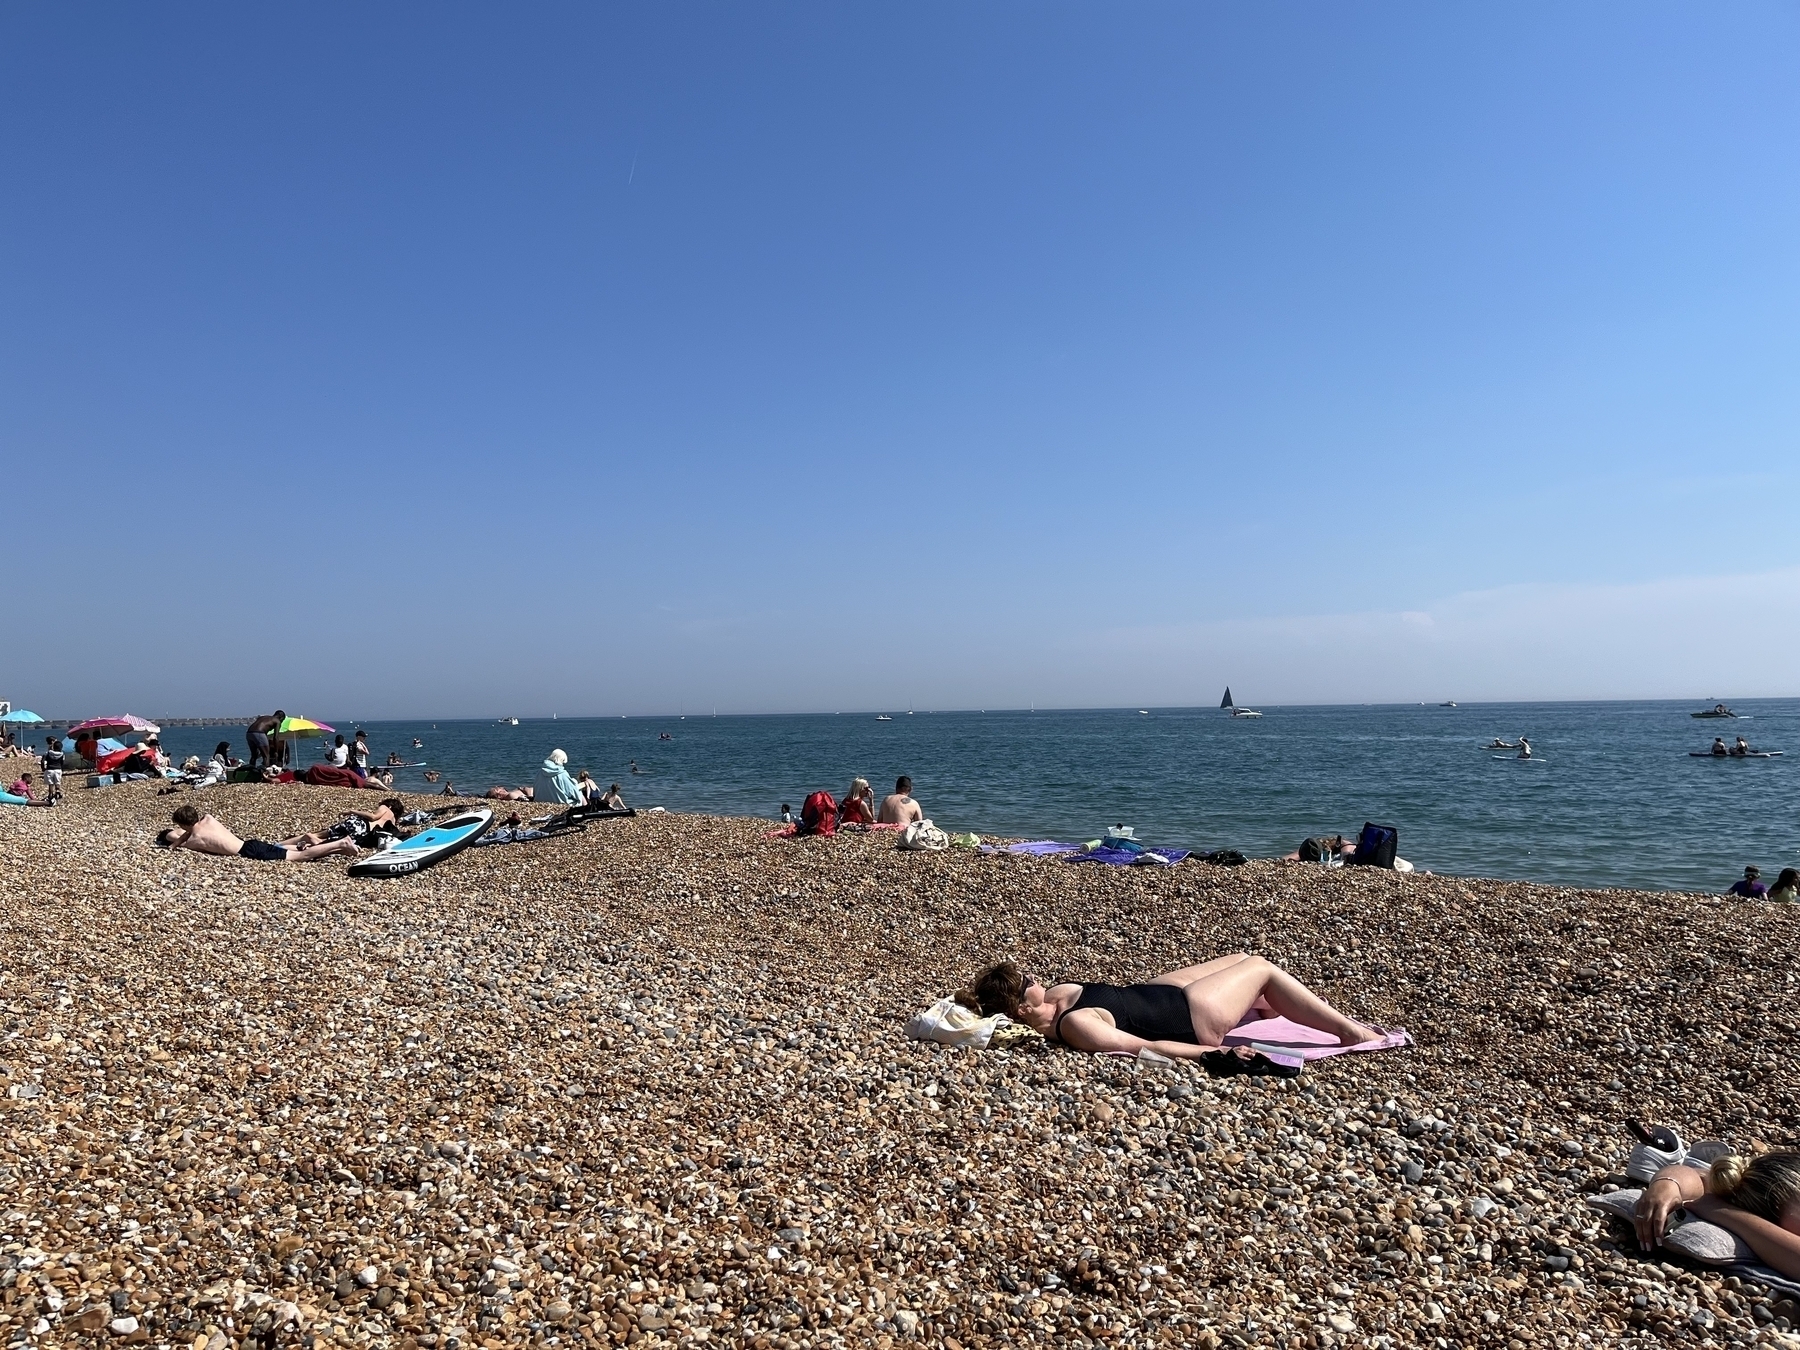 People laying in a pebble beach, clear skies, people are swimming